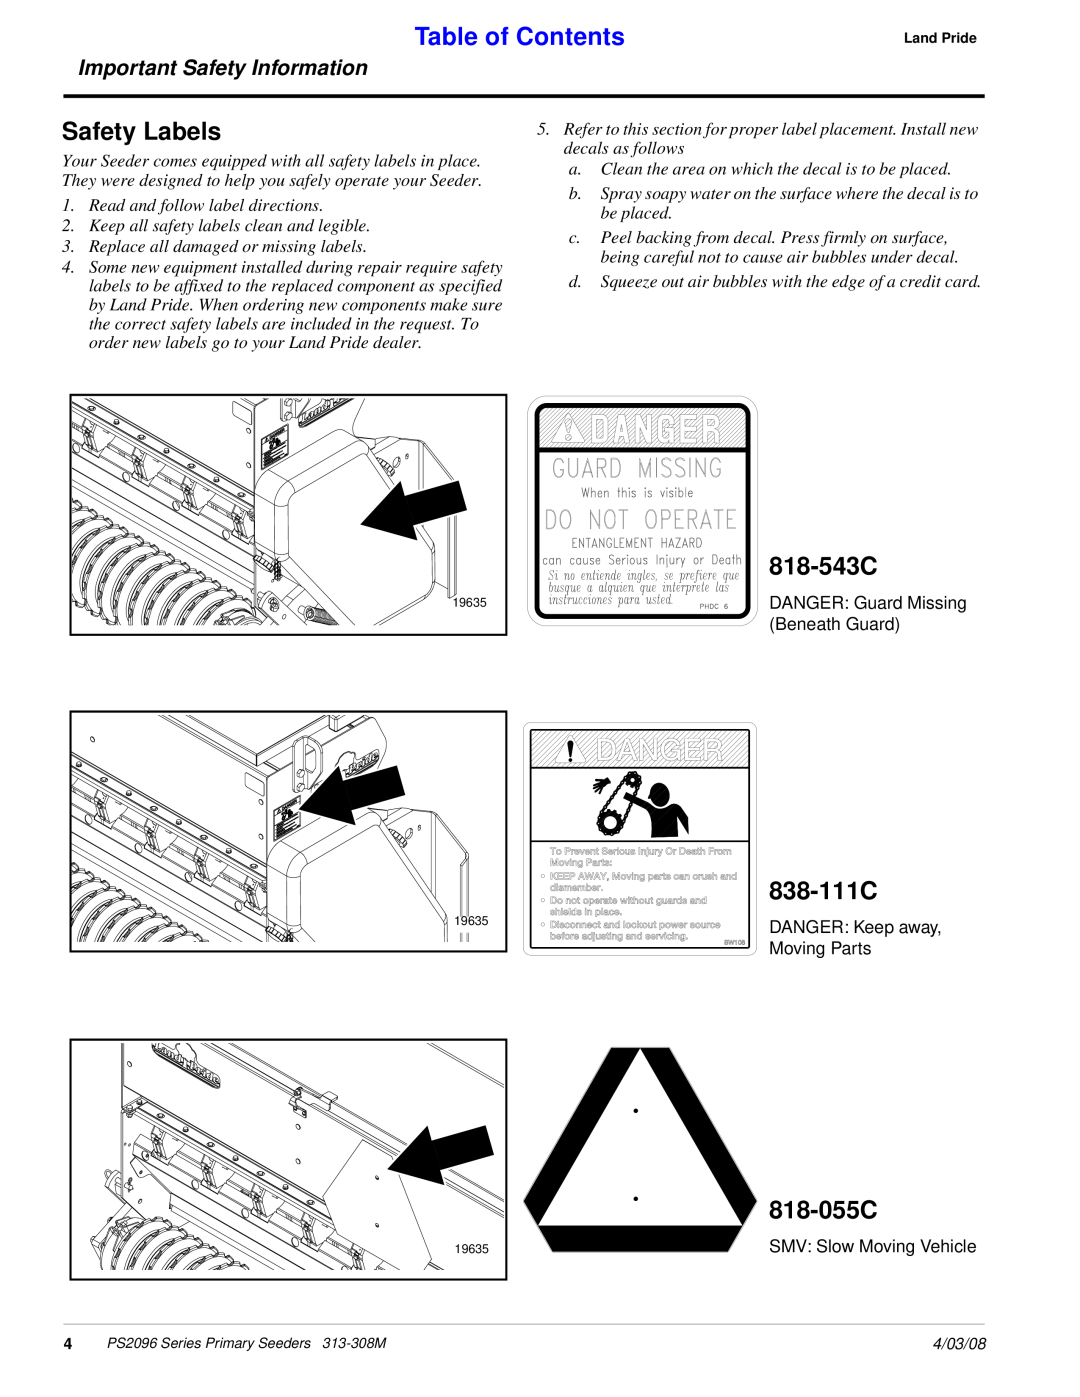 Land Pride 313-308M manual Safety Labels, 818-543C, 838-111C, 818-055C, Table of Contents, Important Safety Information 